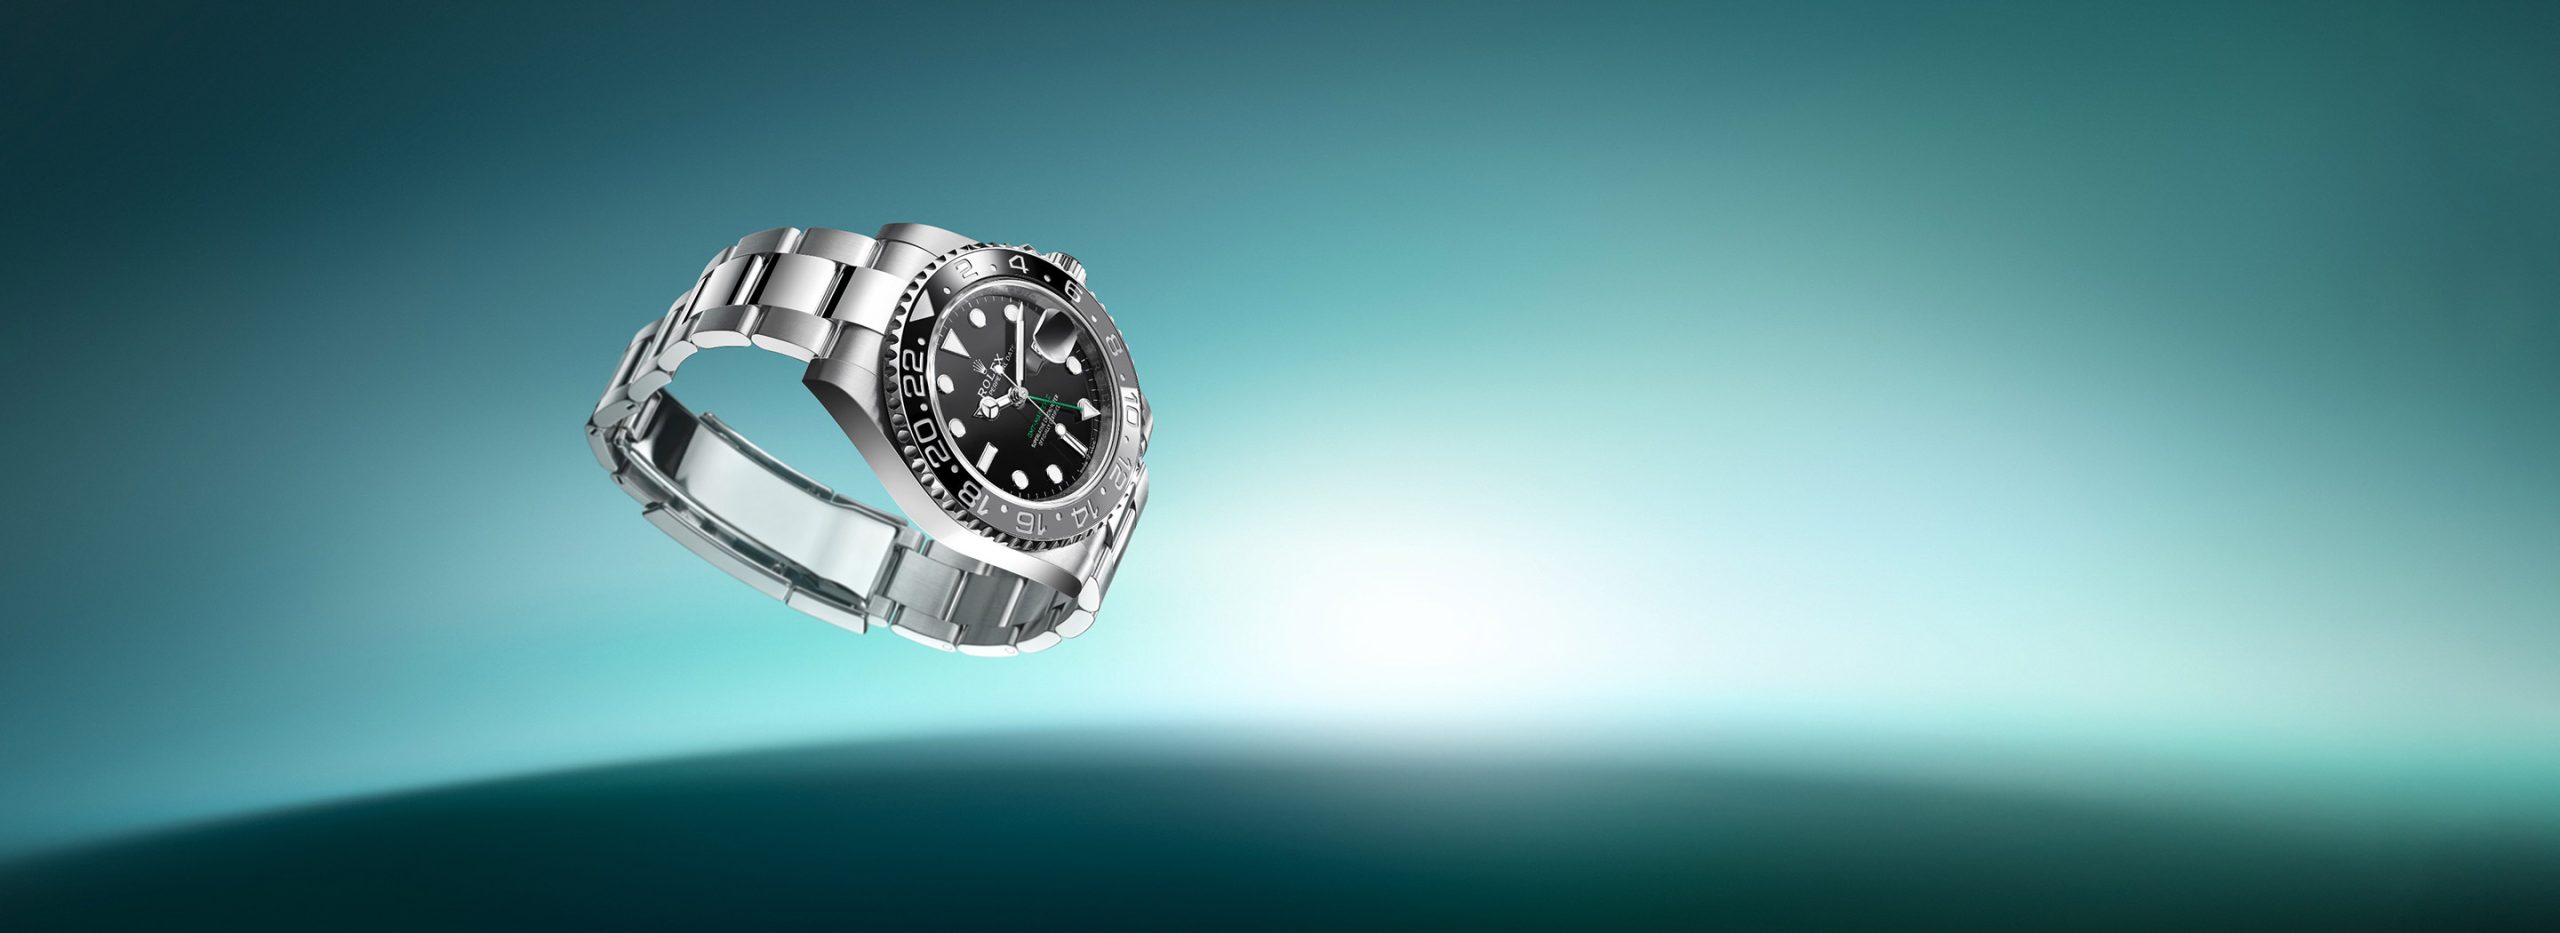 official rolex retailer in Liverpool, London & Manchester - David M Robinson